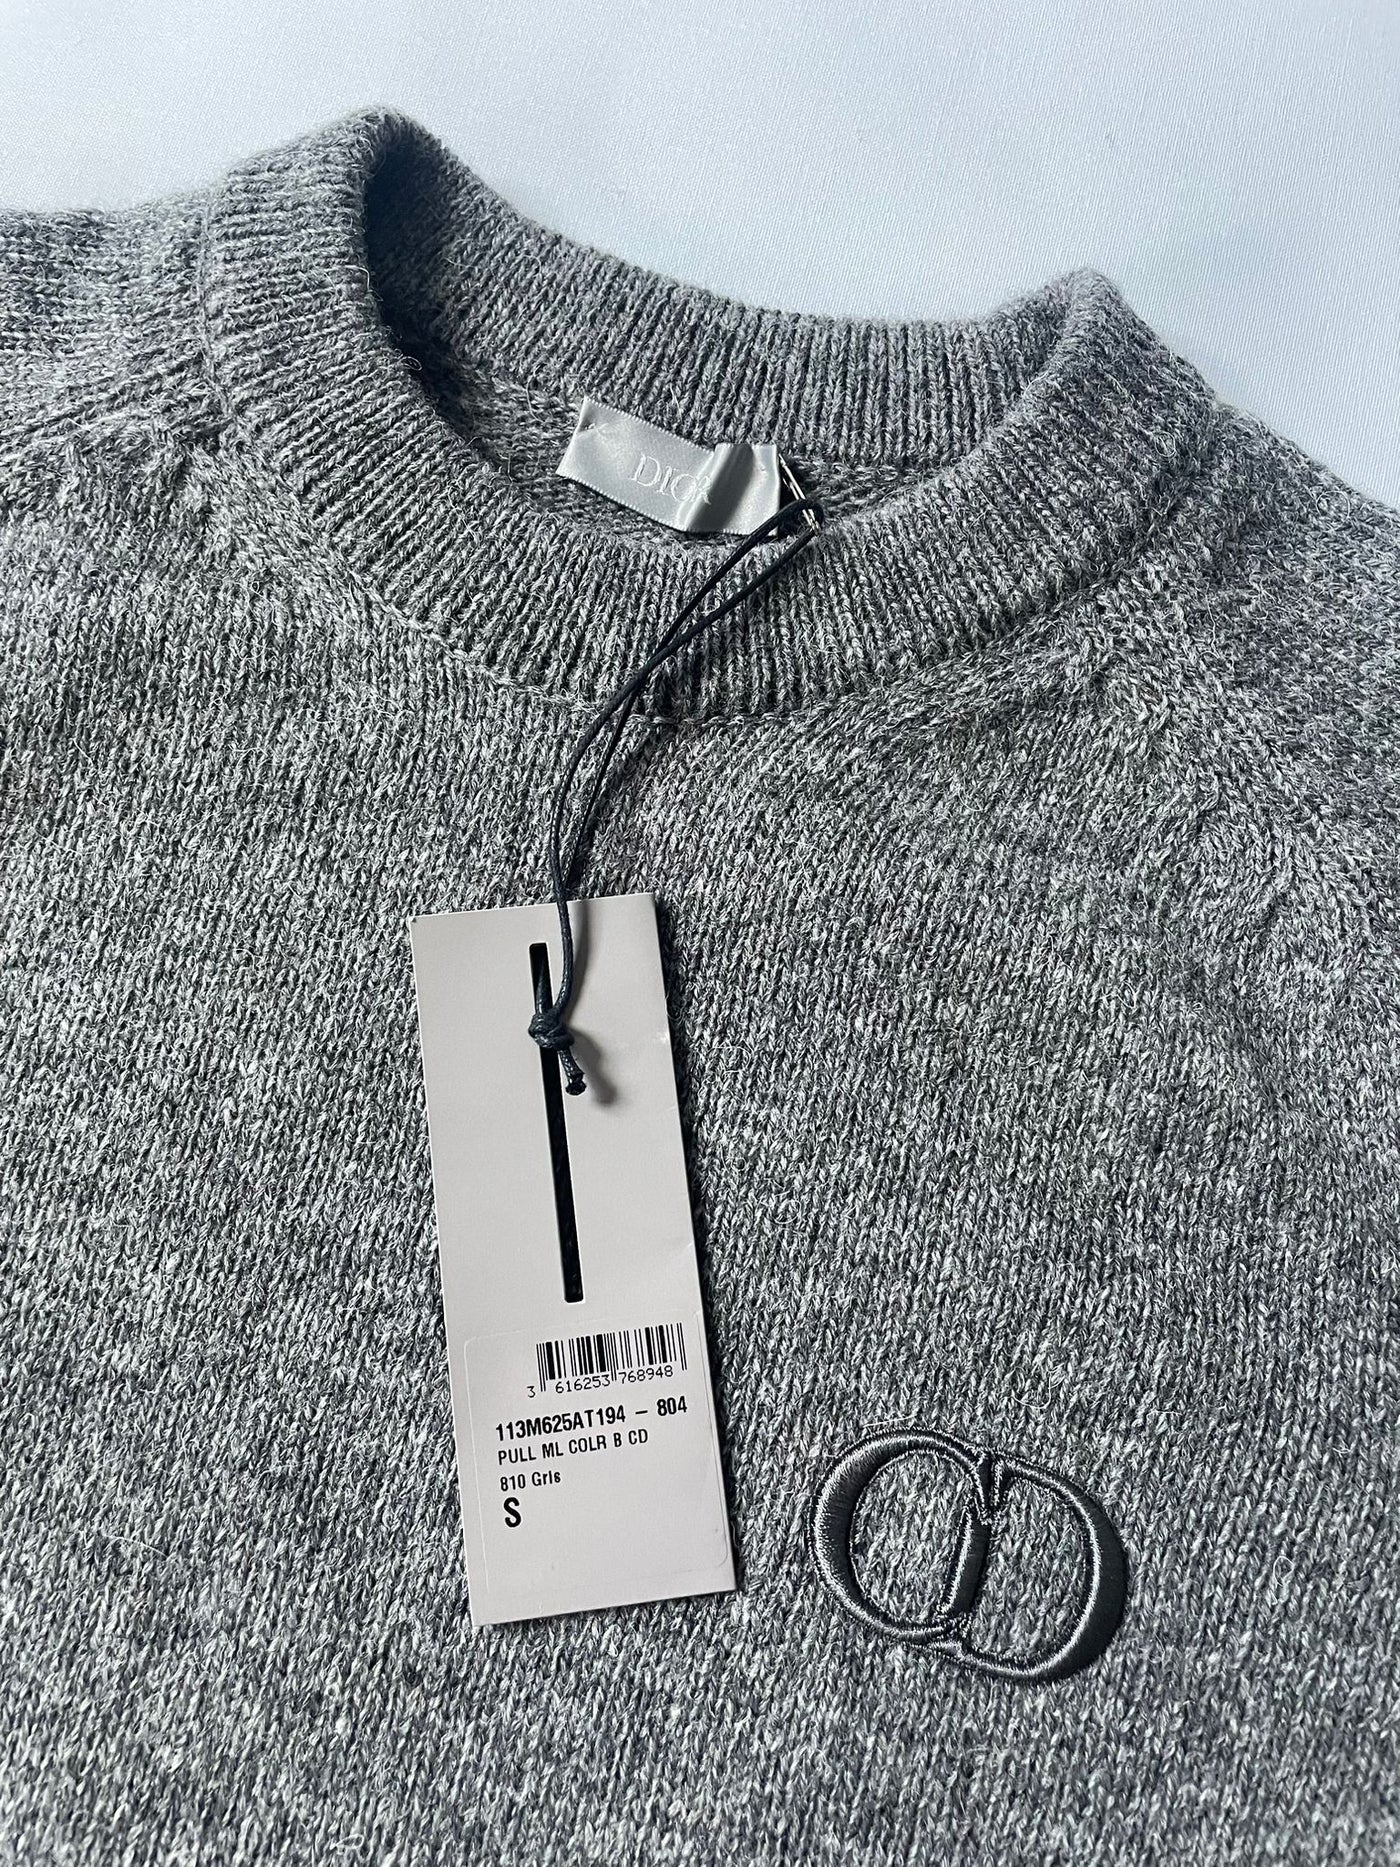 Dior CD Icon Wool Sweater Grey New (Small)